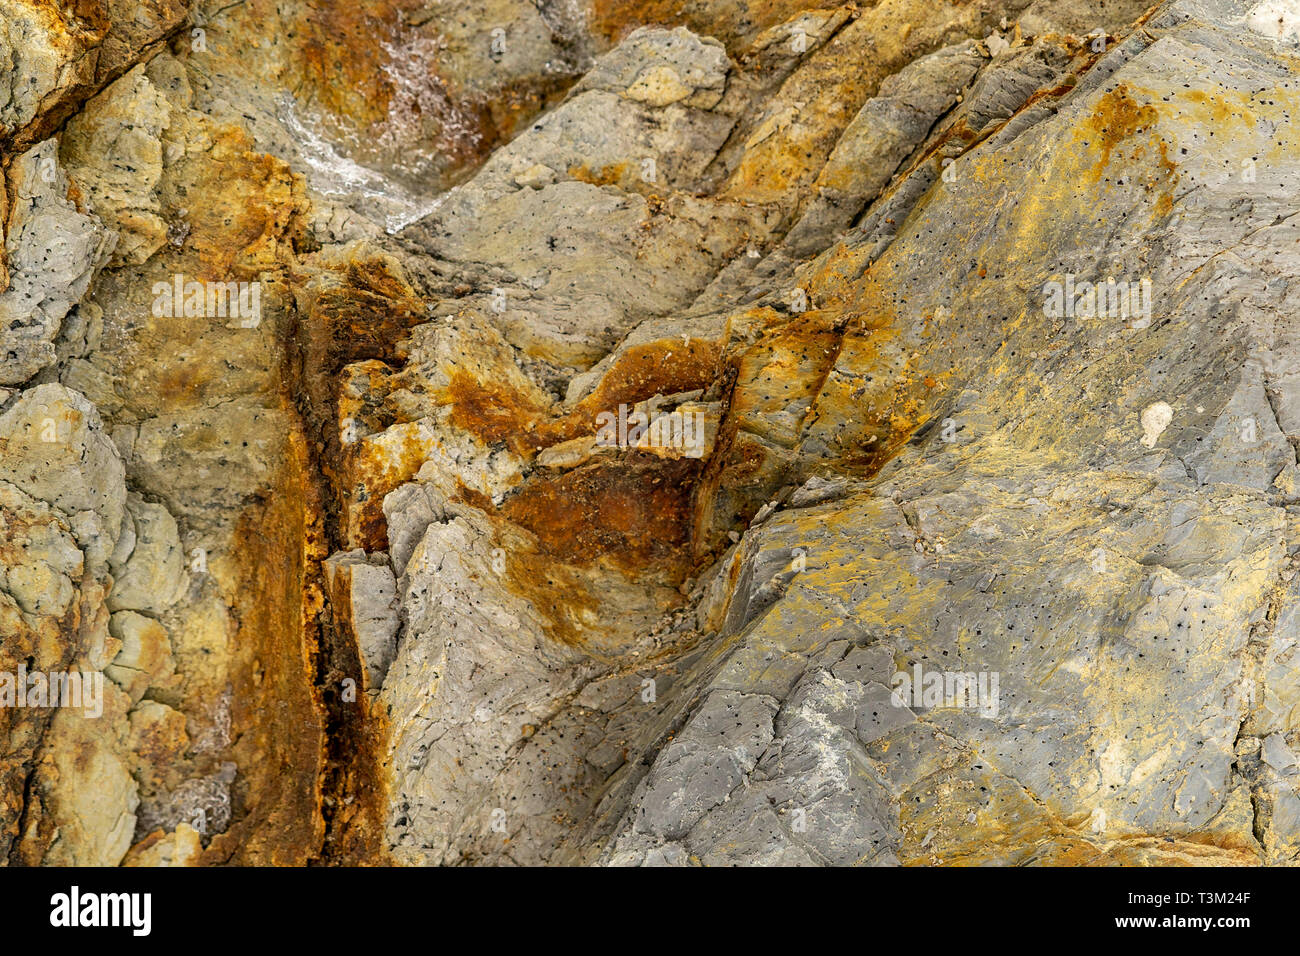 Close up of yellow rock structures Stock Photo